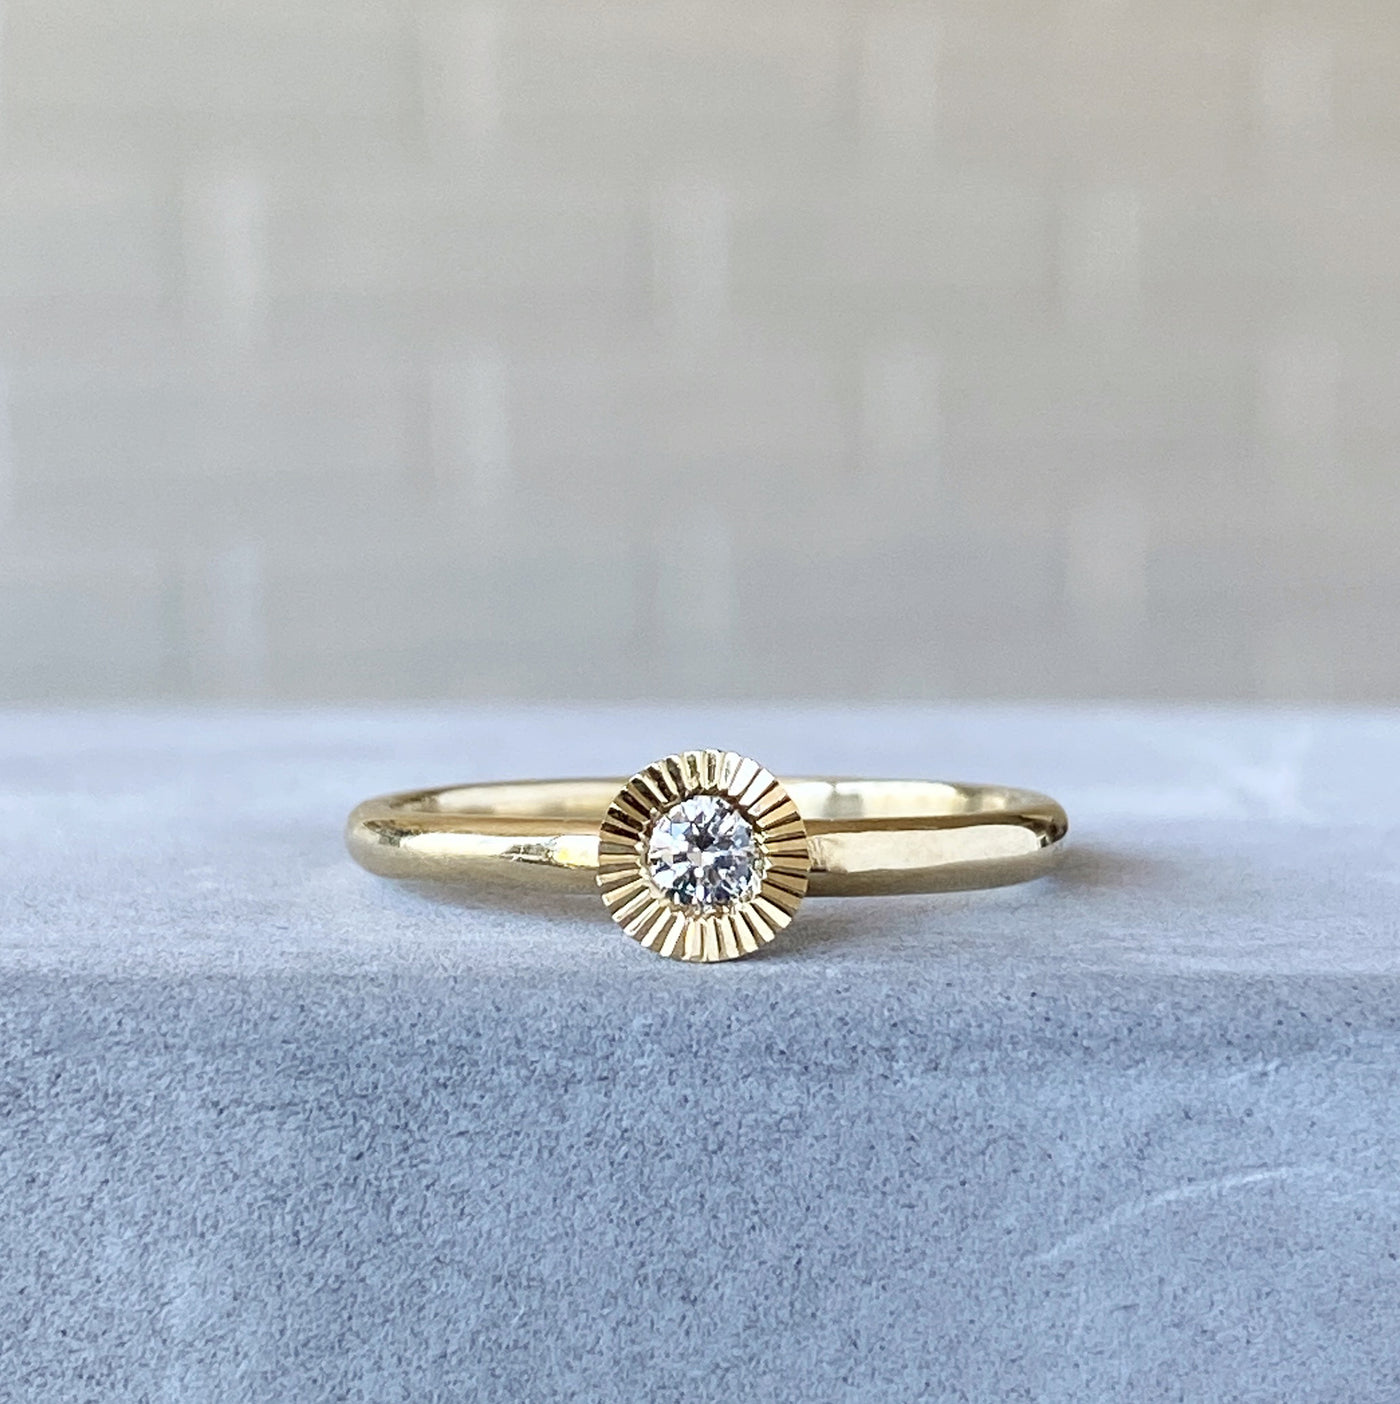 14k yellow gold large aurora stacking ring with a 3mm center diamond and engraved border resting on concrete